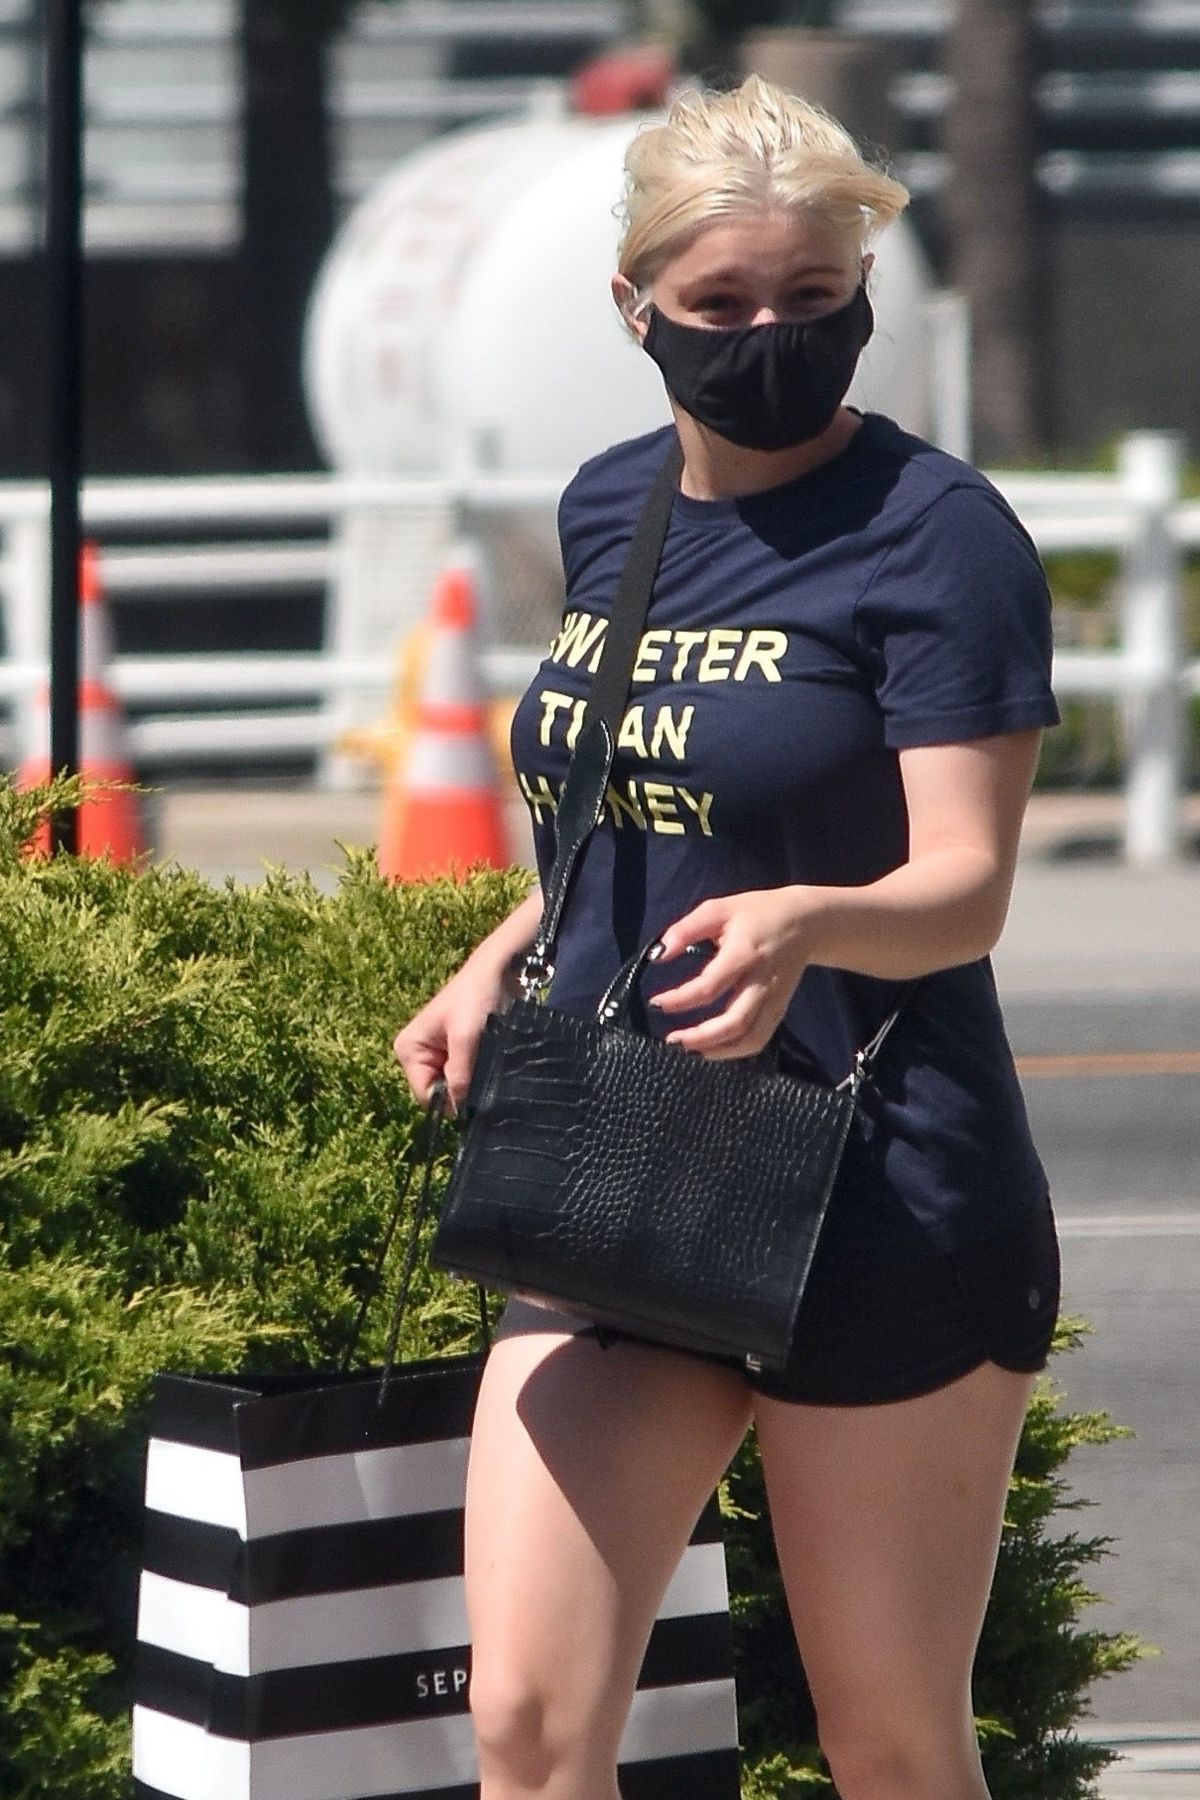 ARIEL WINTER Shopping at Sephora in Los Angeles 07/07/2020 – HawtCelebs